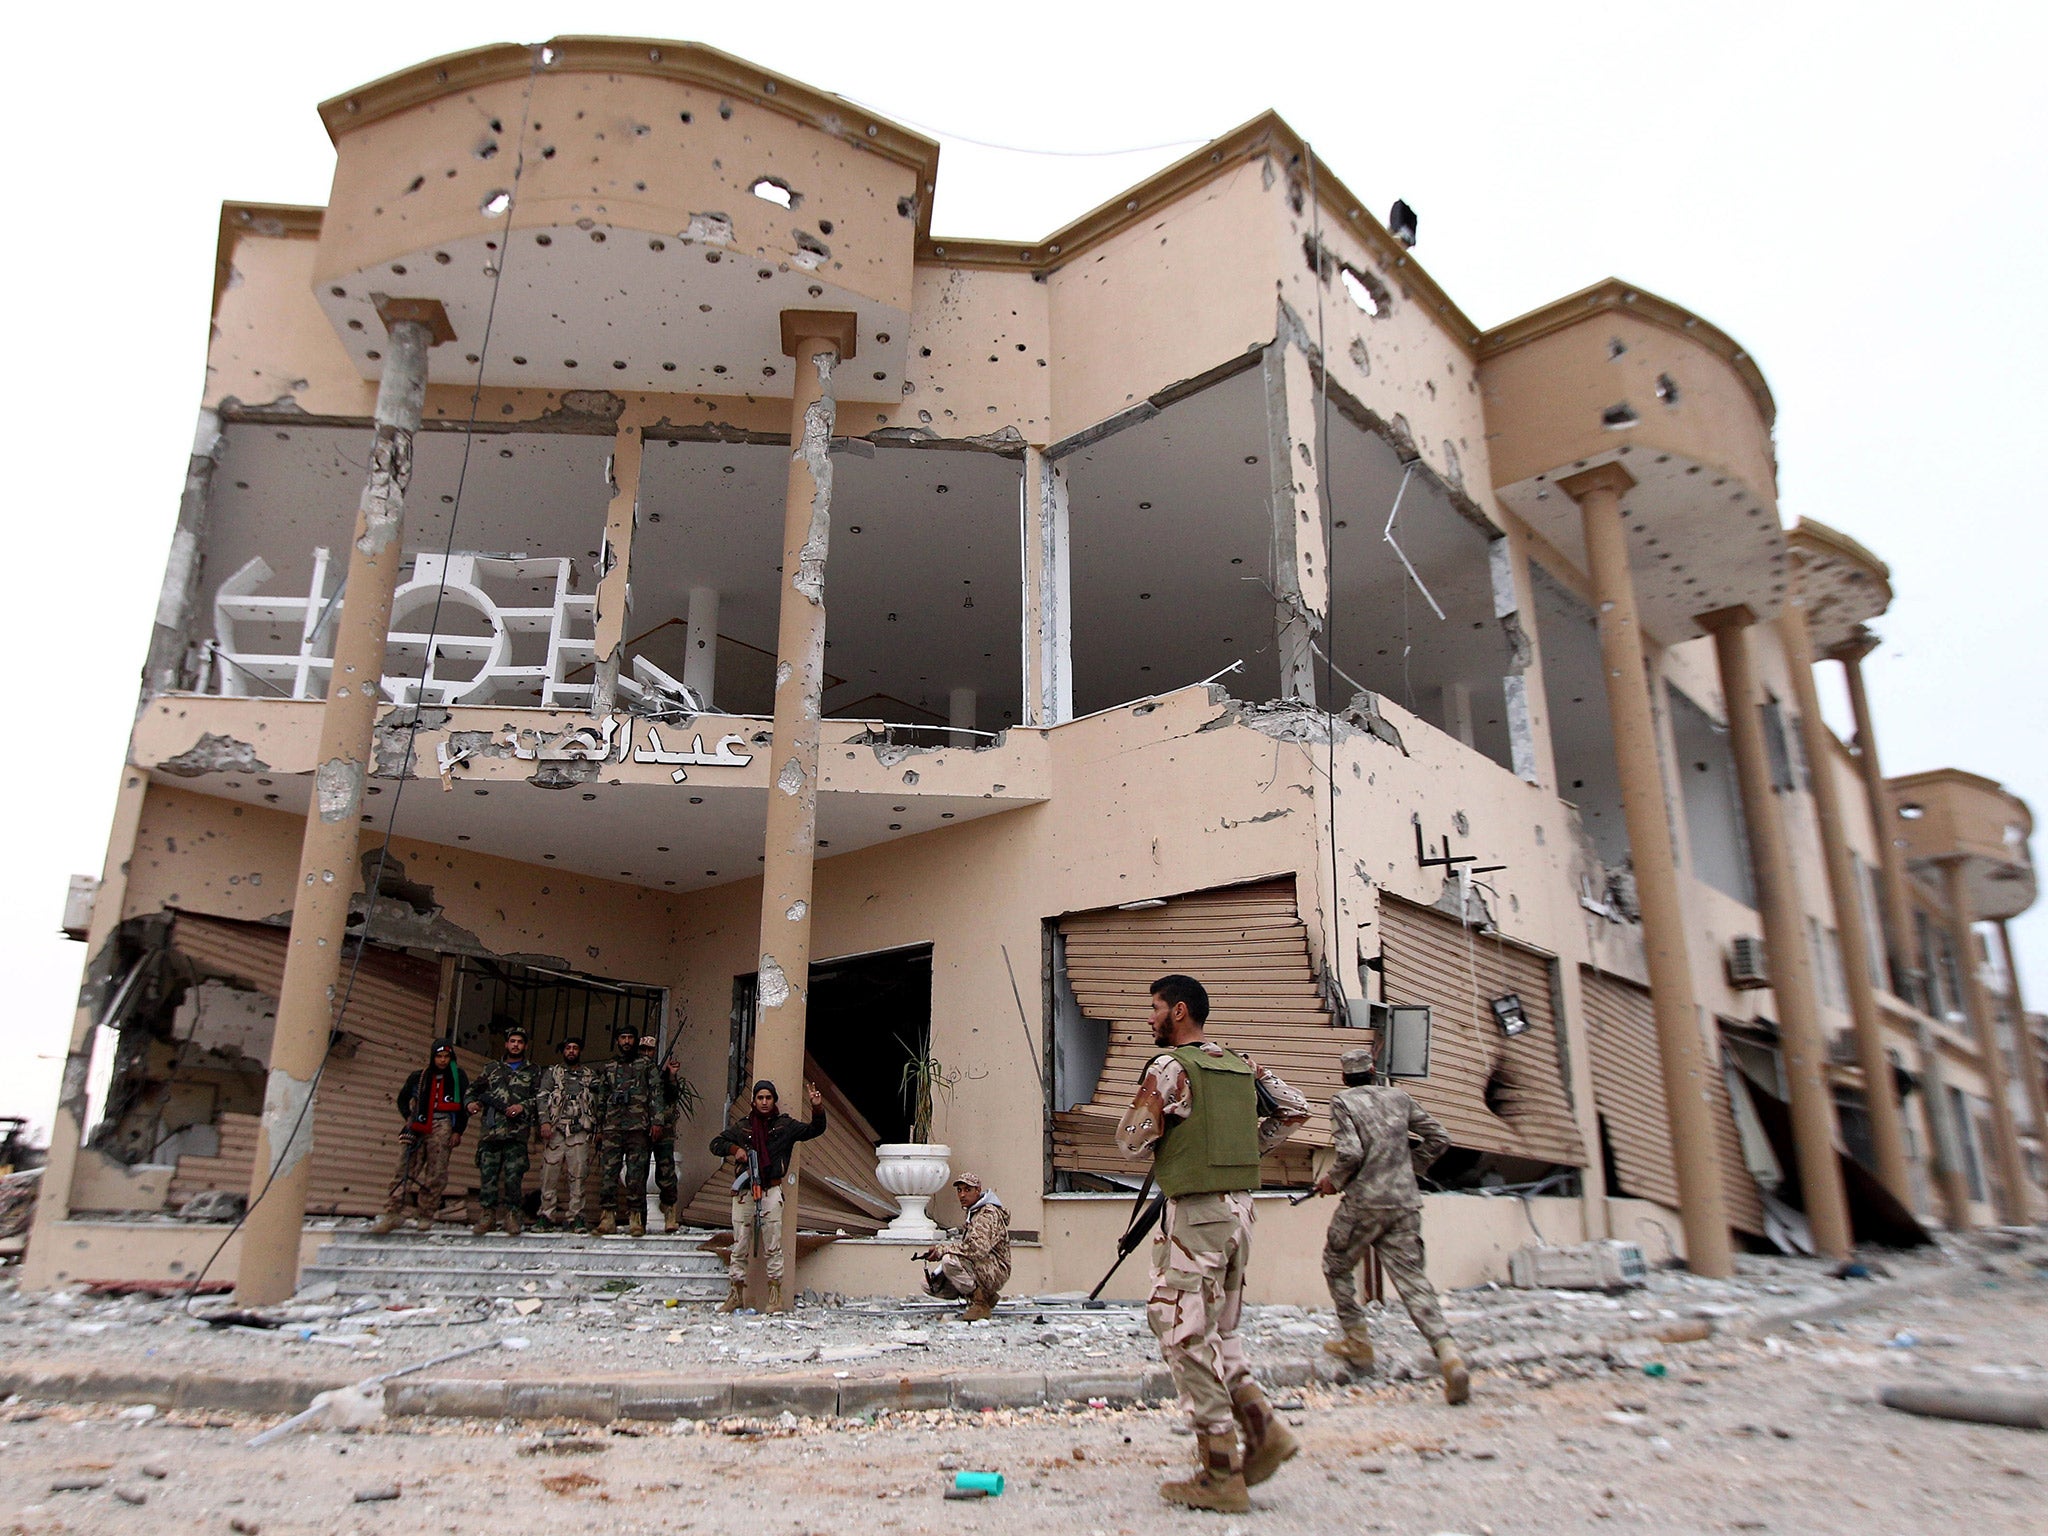 Libyan National Army fighters stand at the entrance of a destroyed building after clashes with Isis in Benghazi, last December